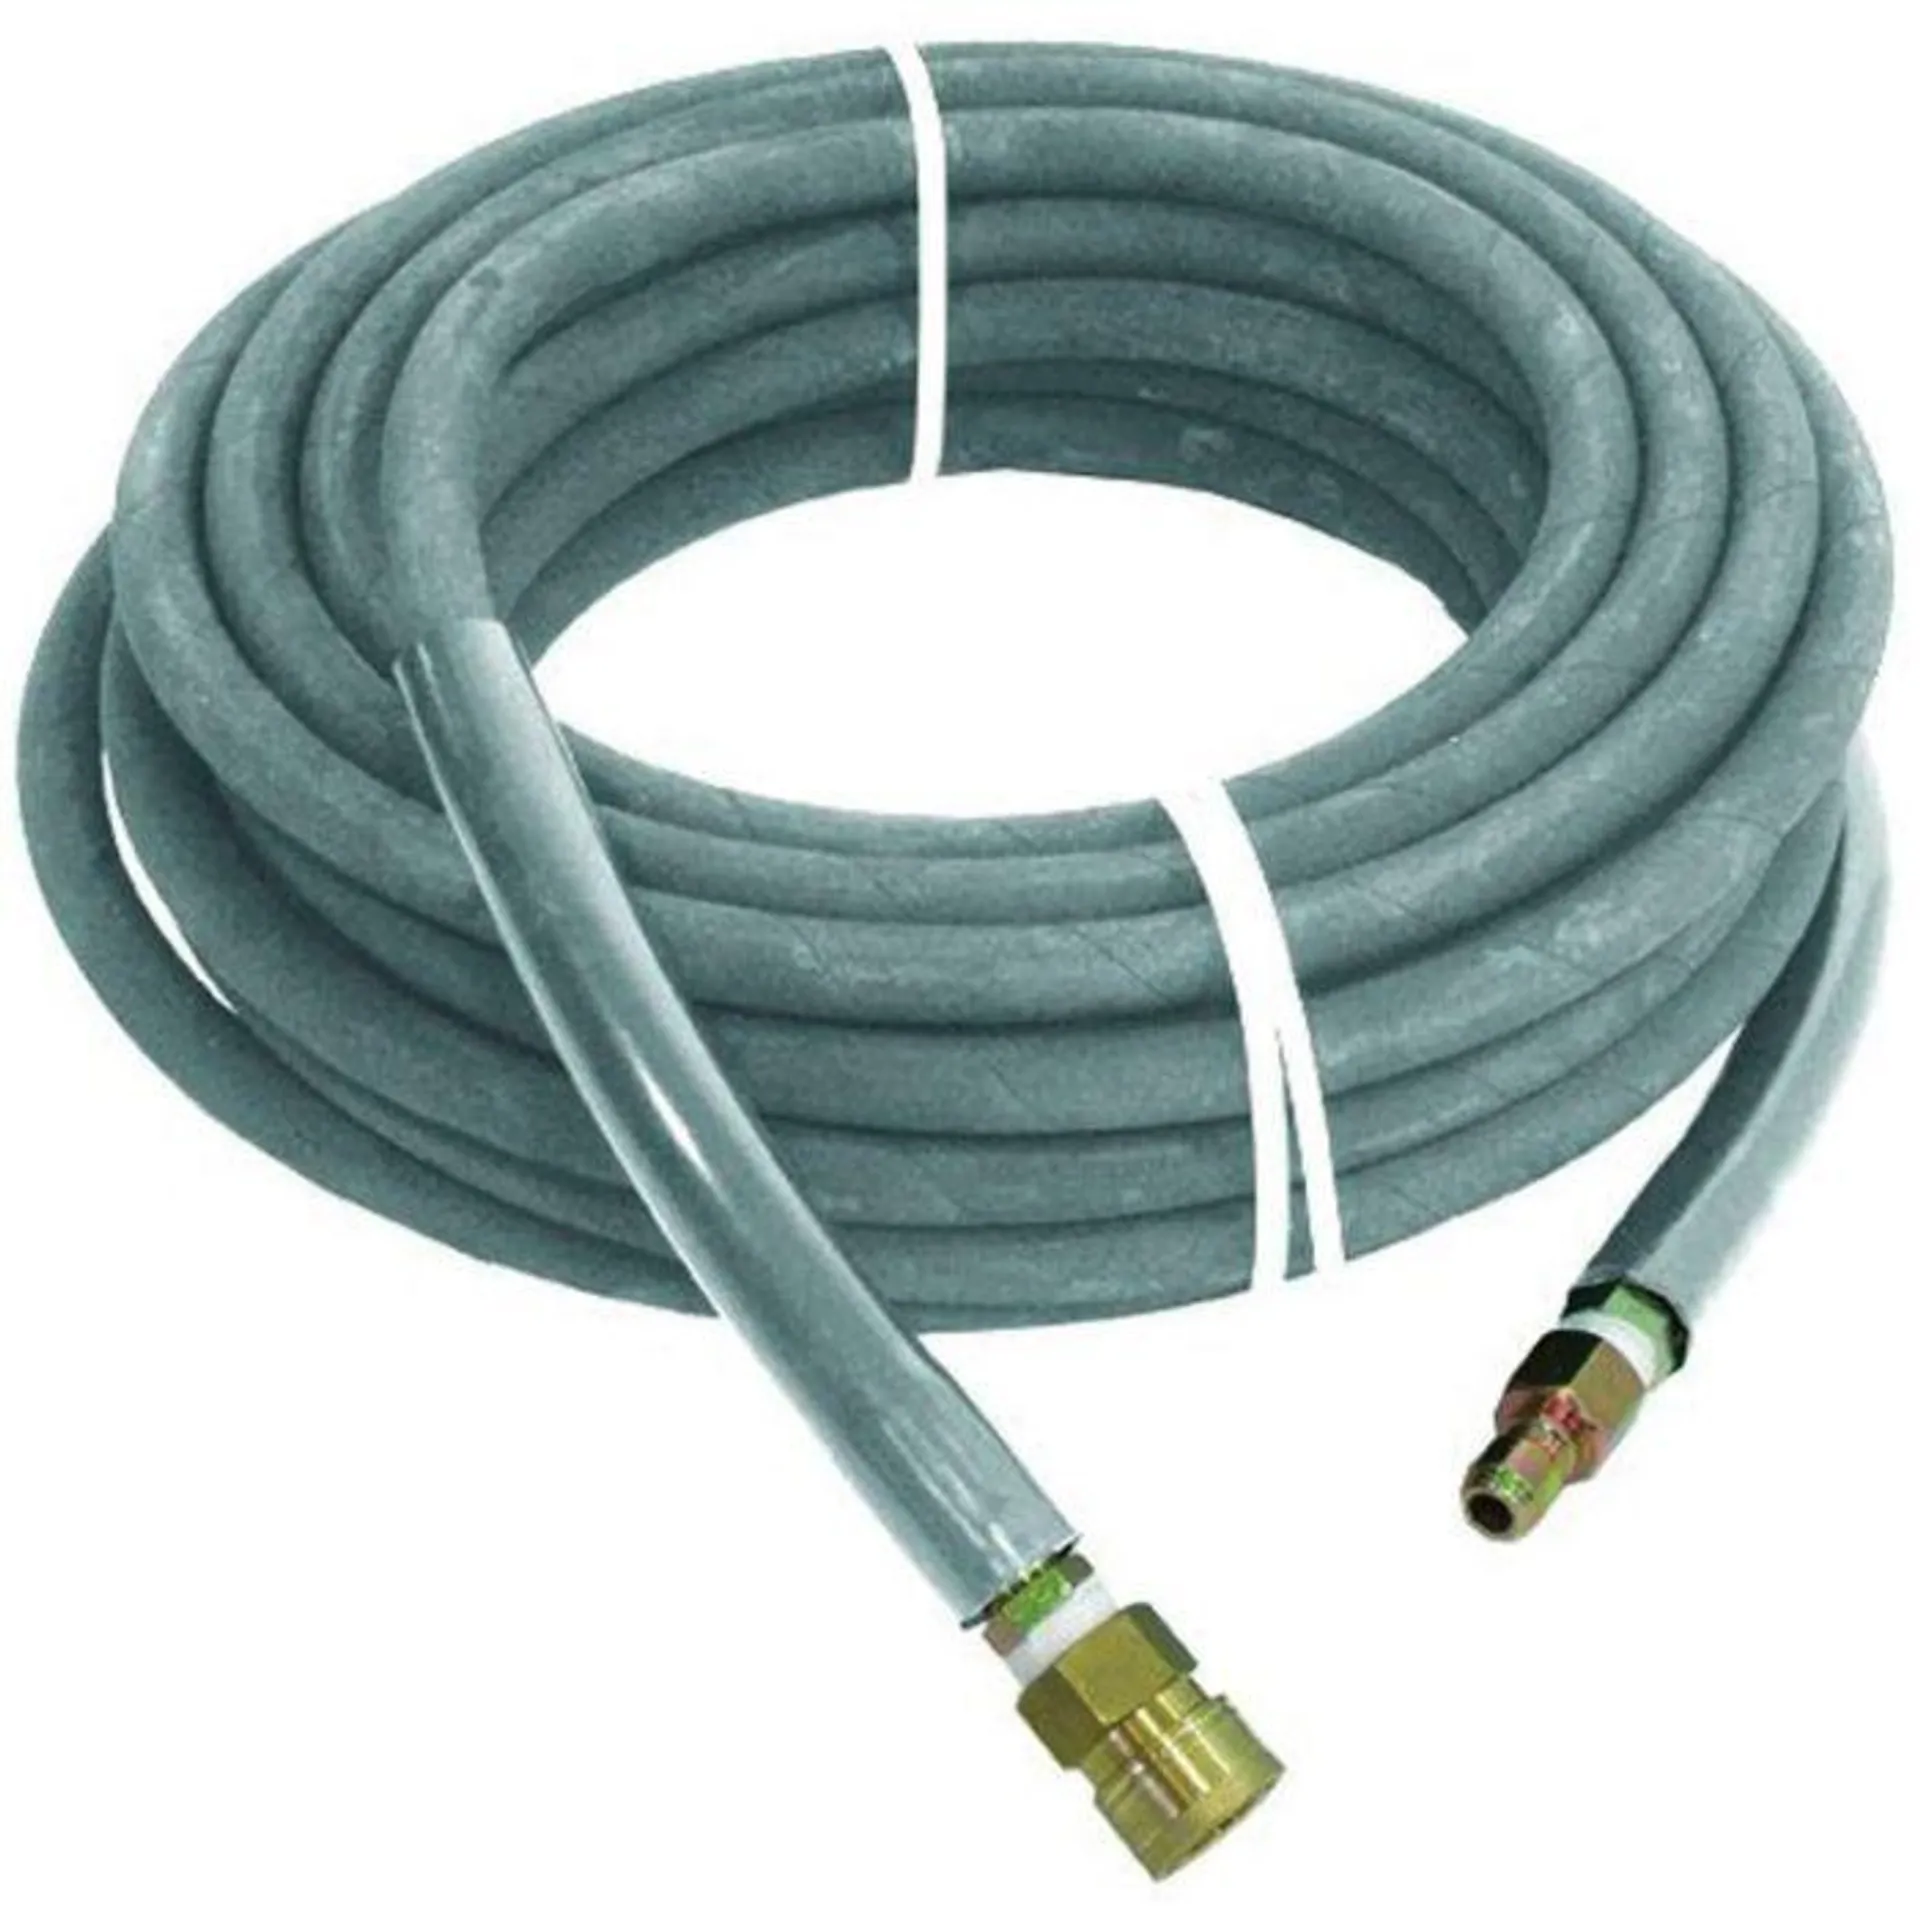 BE 50' Non-Marking Pressure Washer Hose - 4,000 PSI